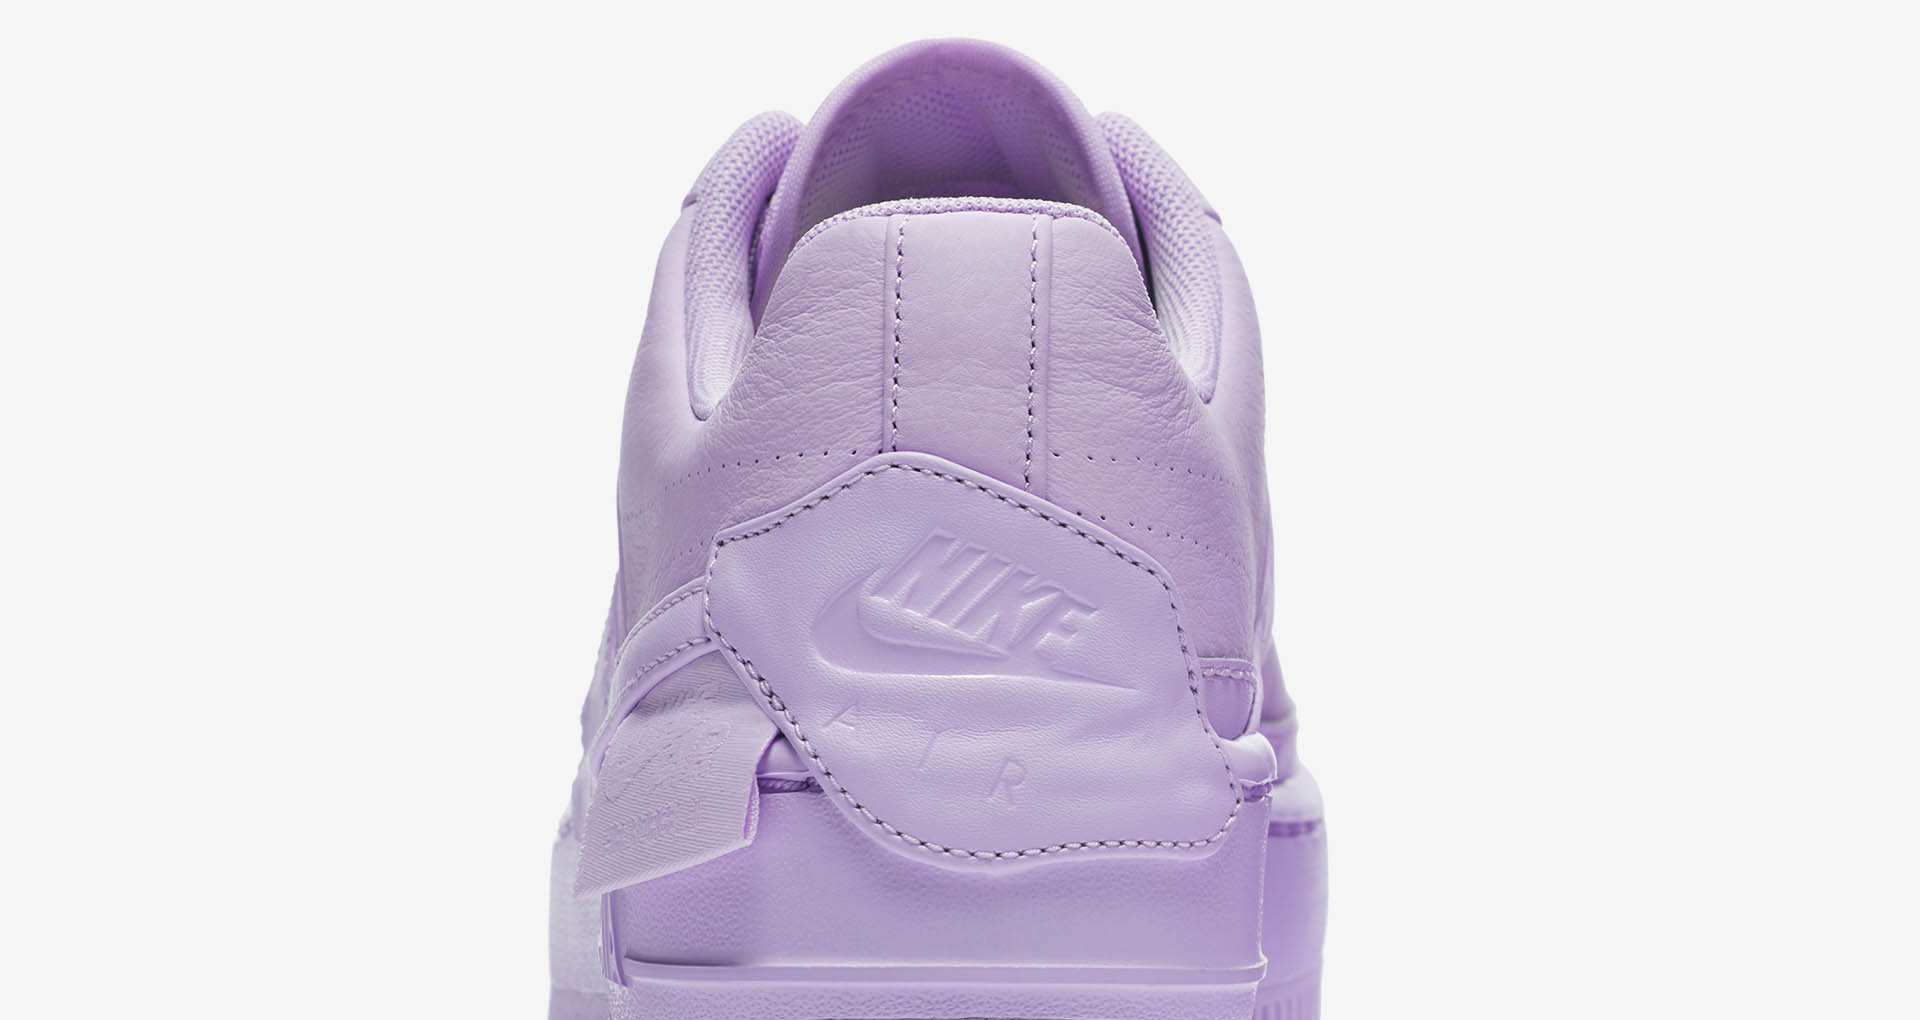 09-nike-womens-air-force-1-jester-xx-violet-mist-ao1220-500